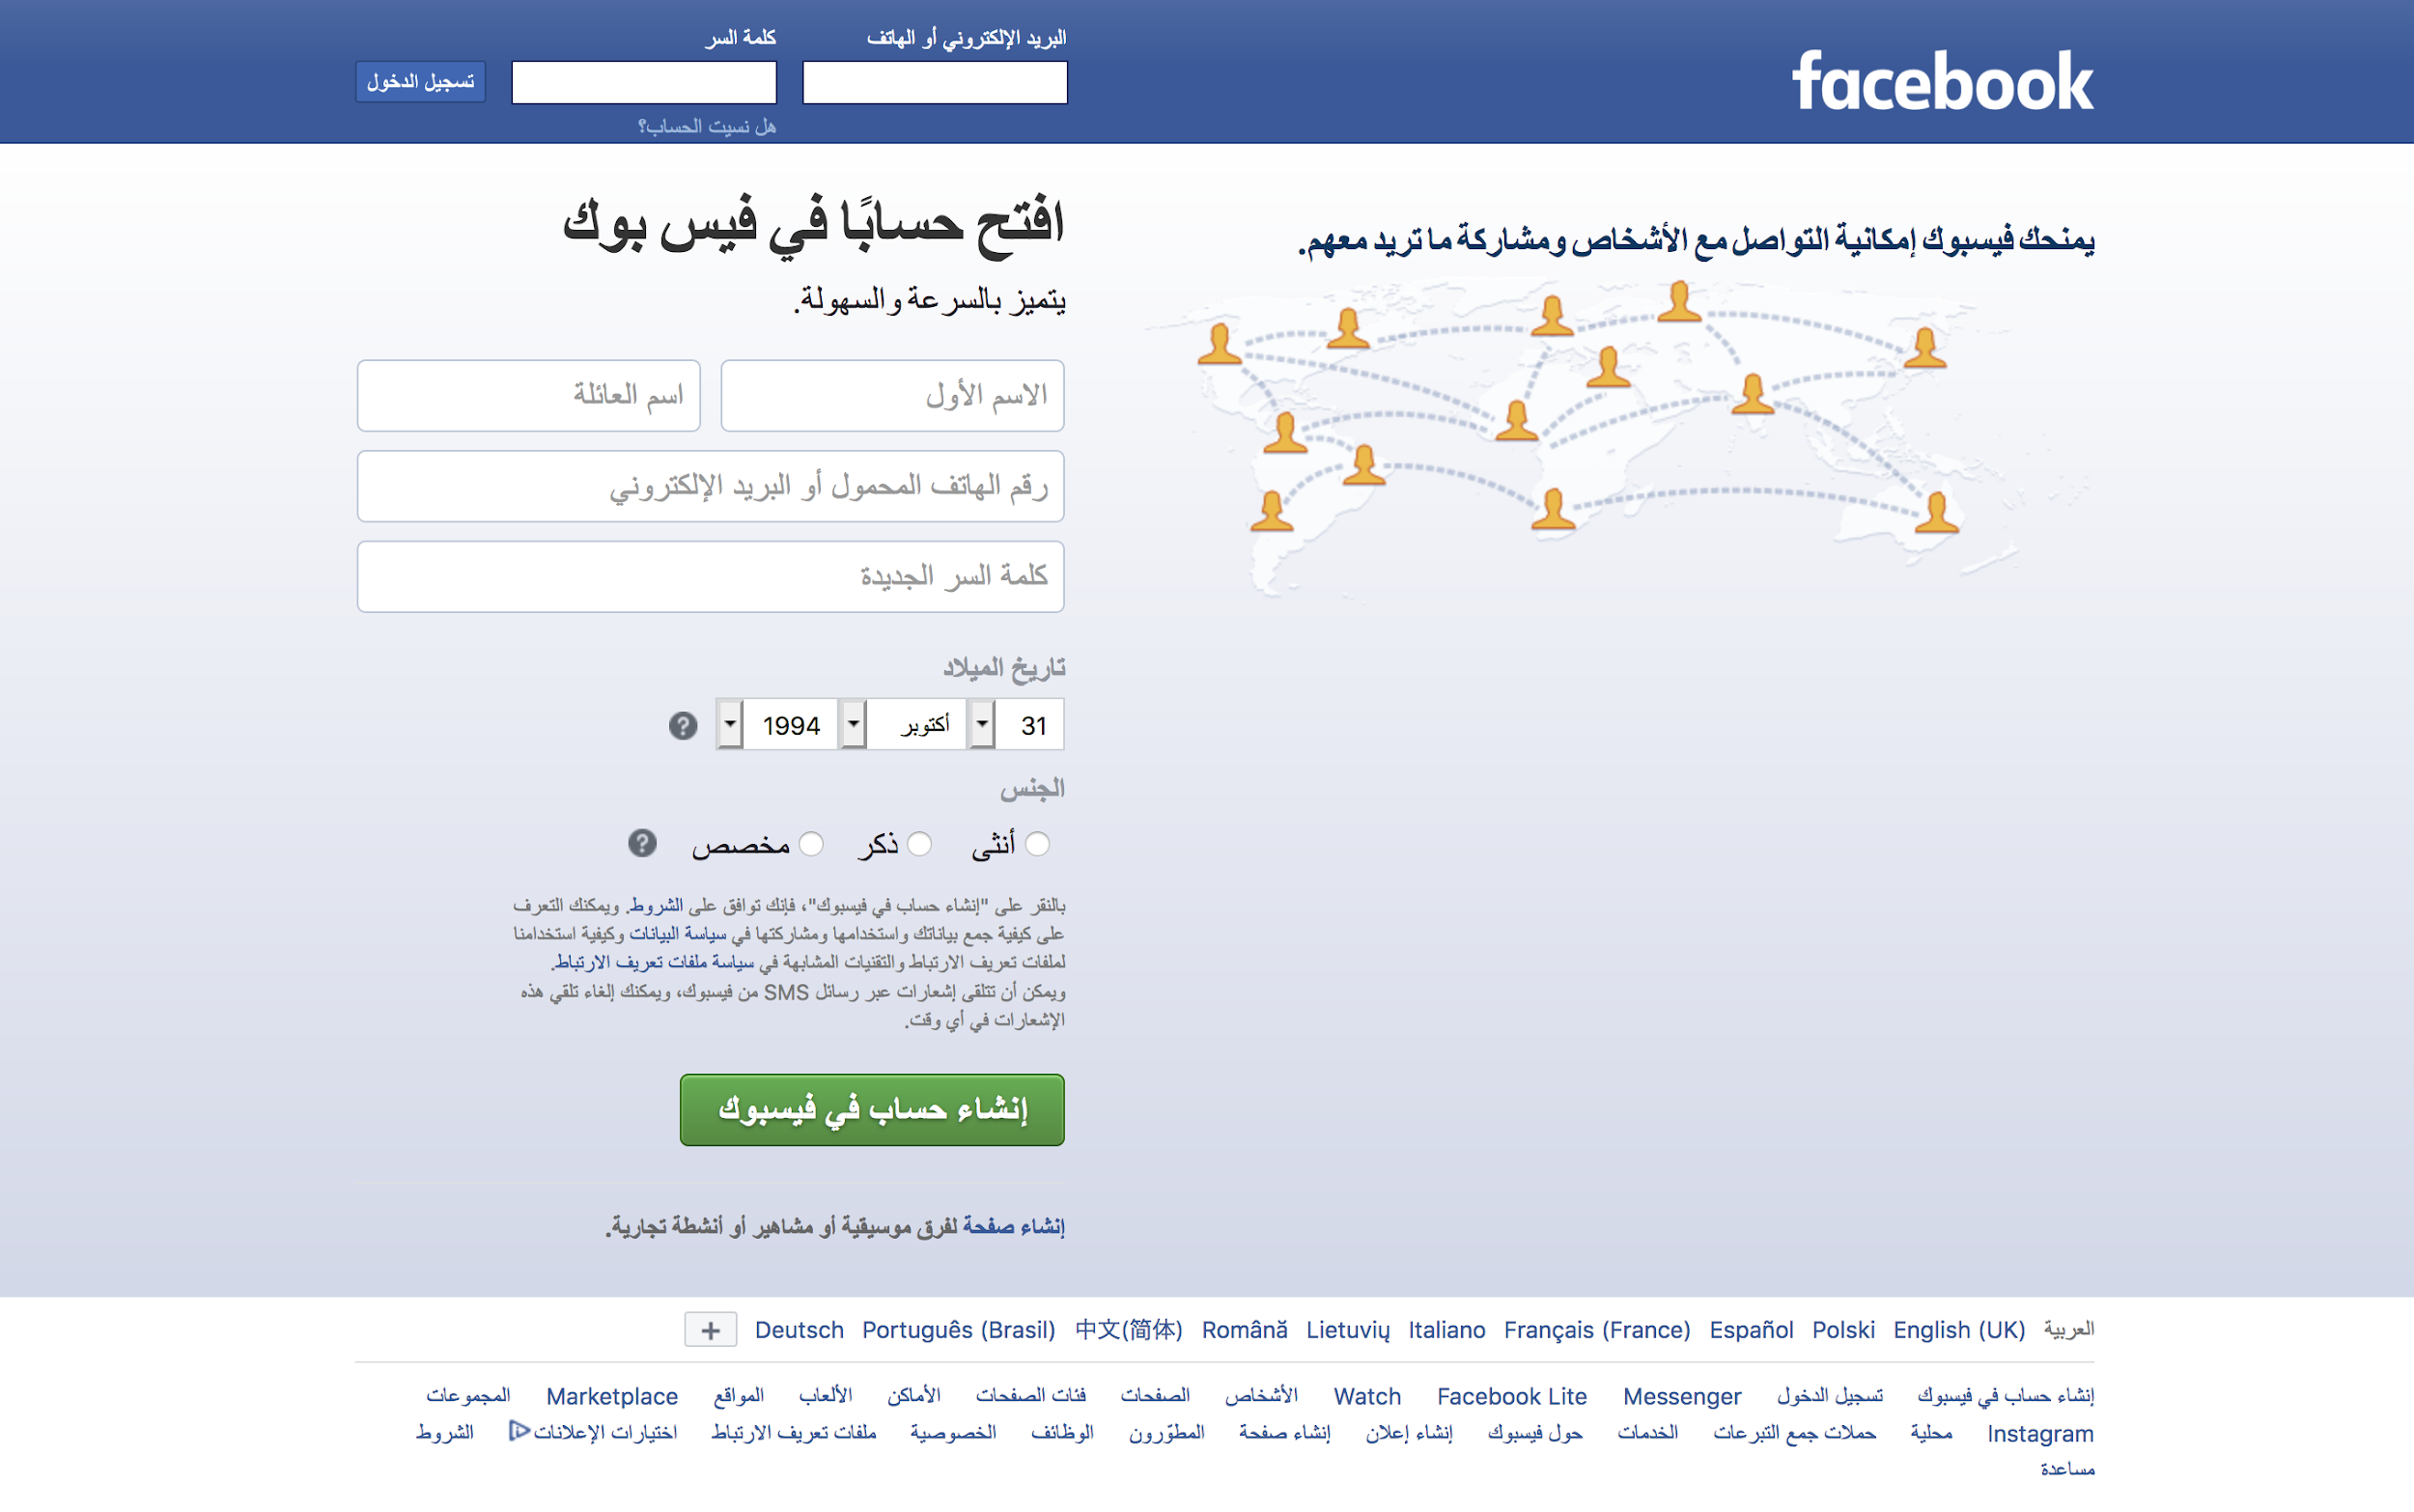 white blue and yellow themed Facebook's 'create accout' page, design inversed to accomodate to Arabic audiences